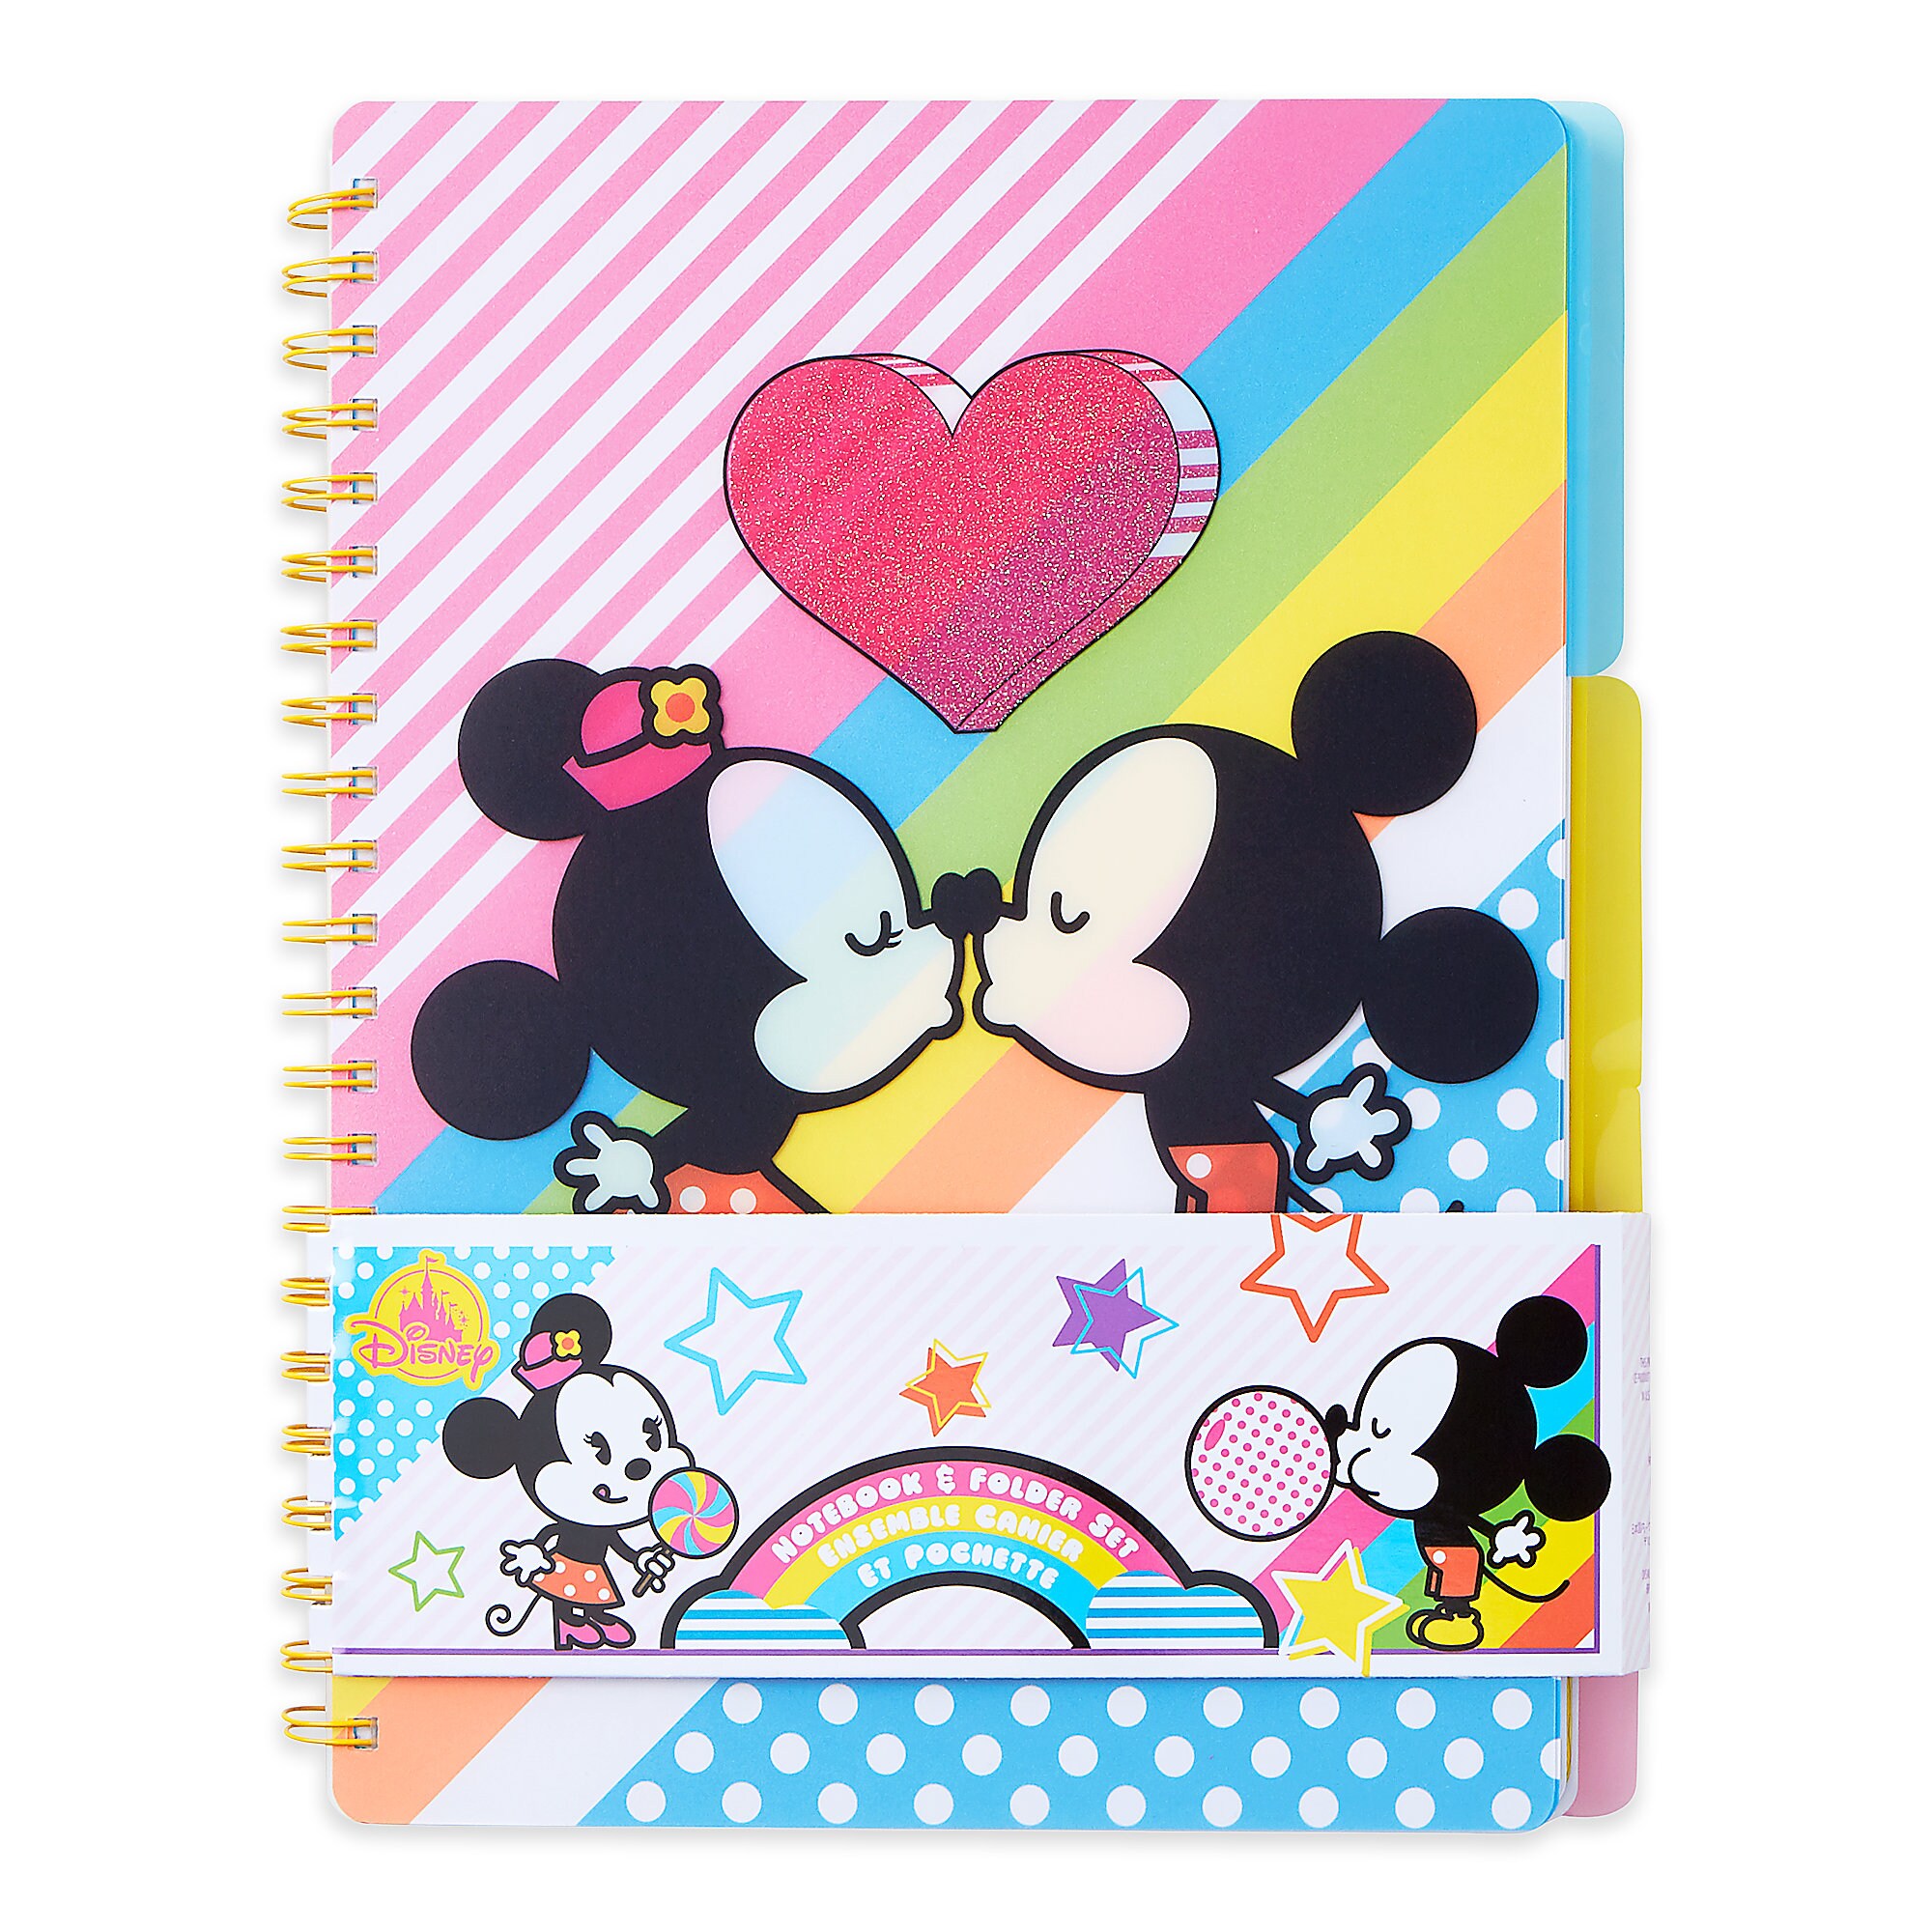 Mickey and Minnie Mouse Notebook and Folder Set